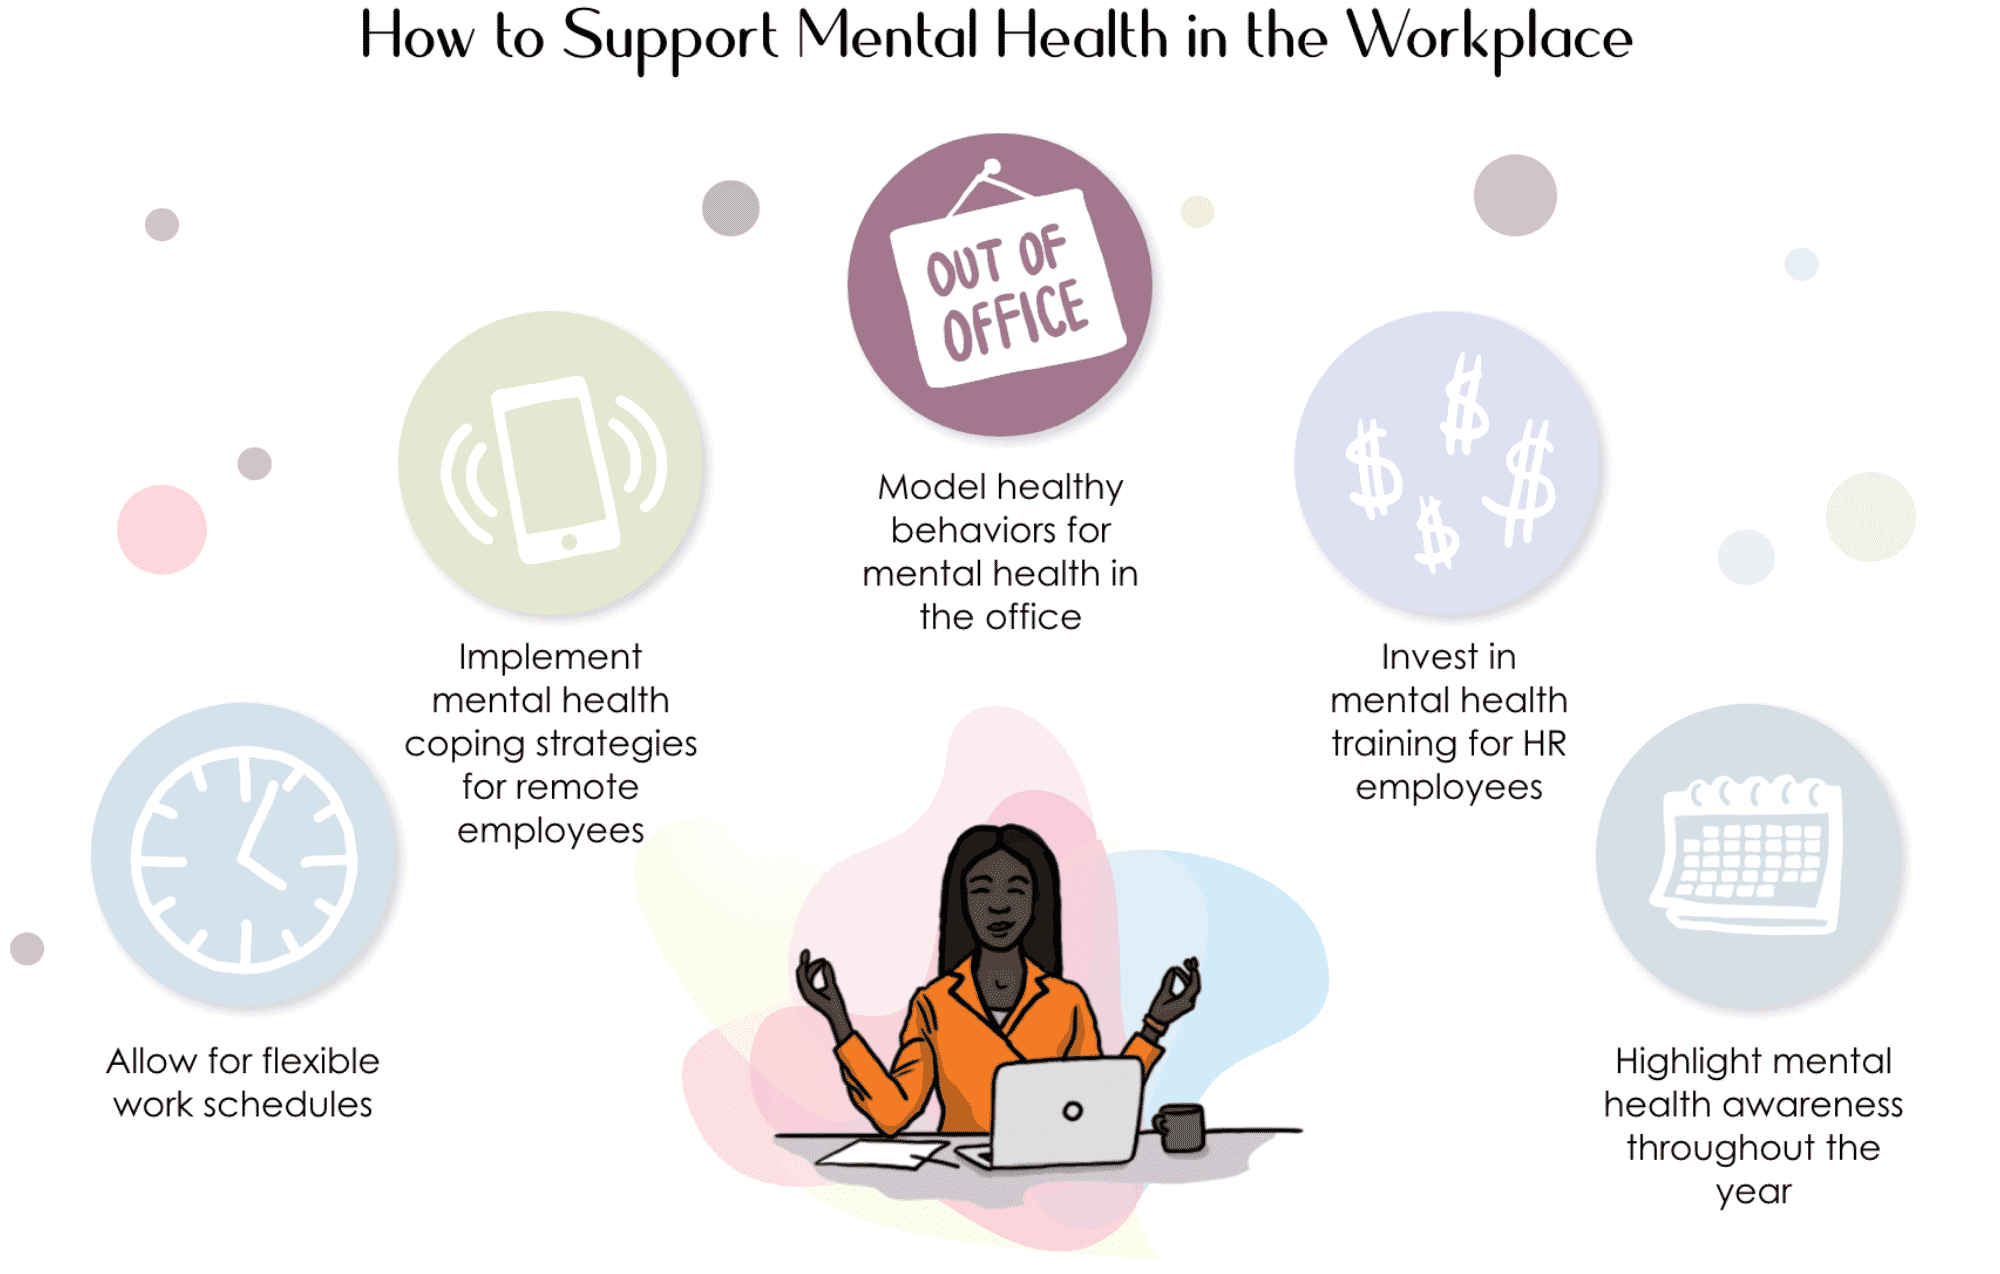 Model healthy behaviors for mental health in the office 